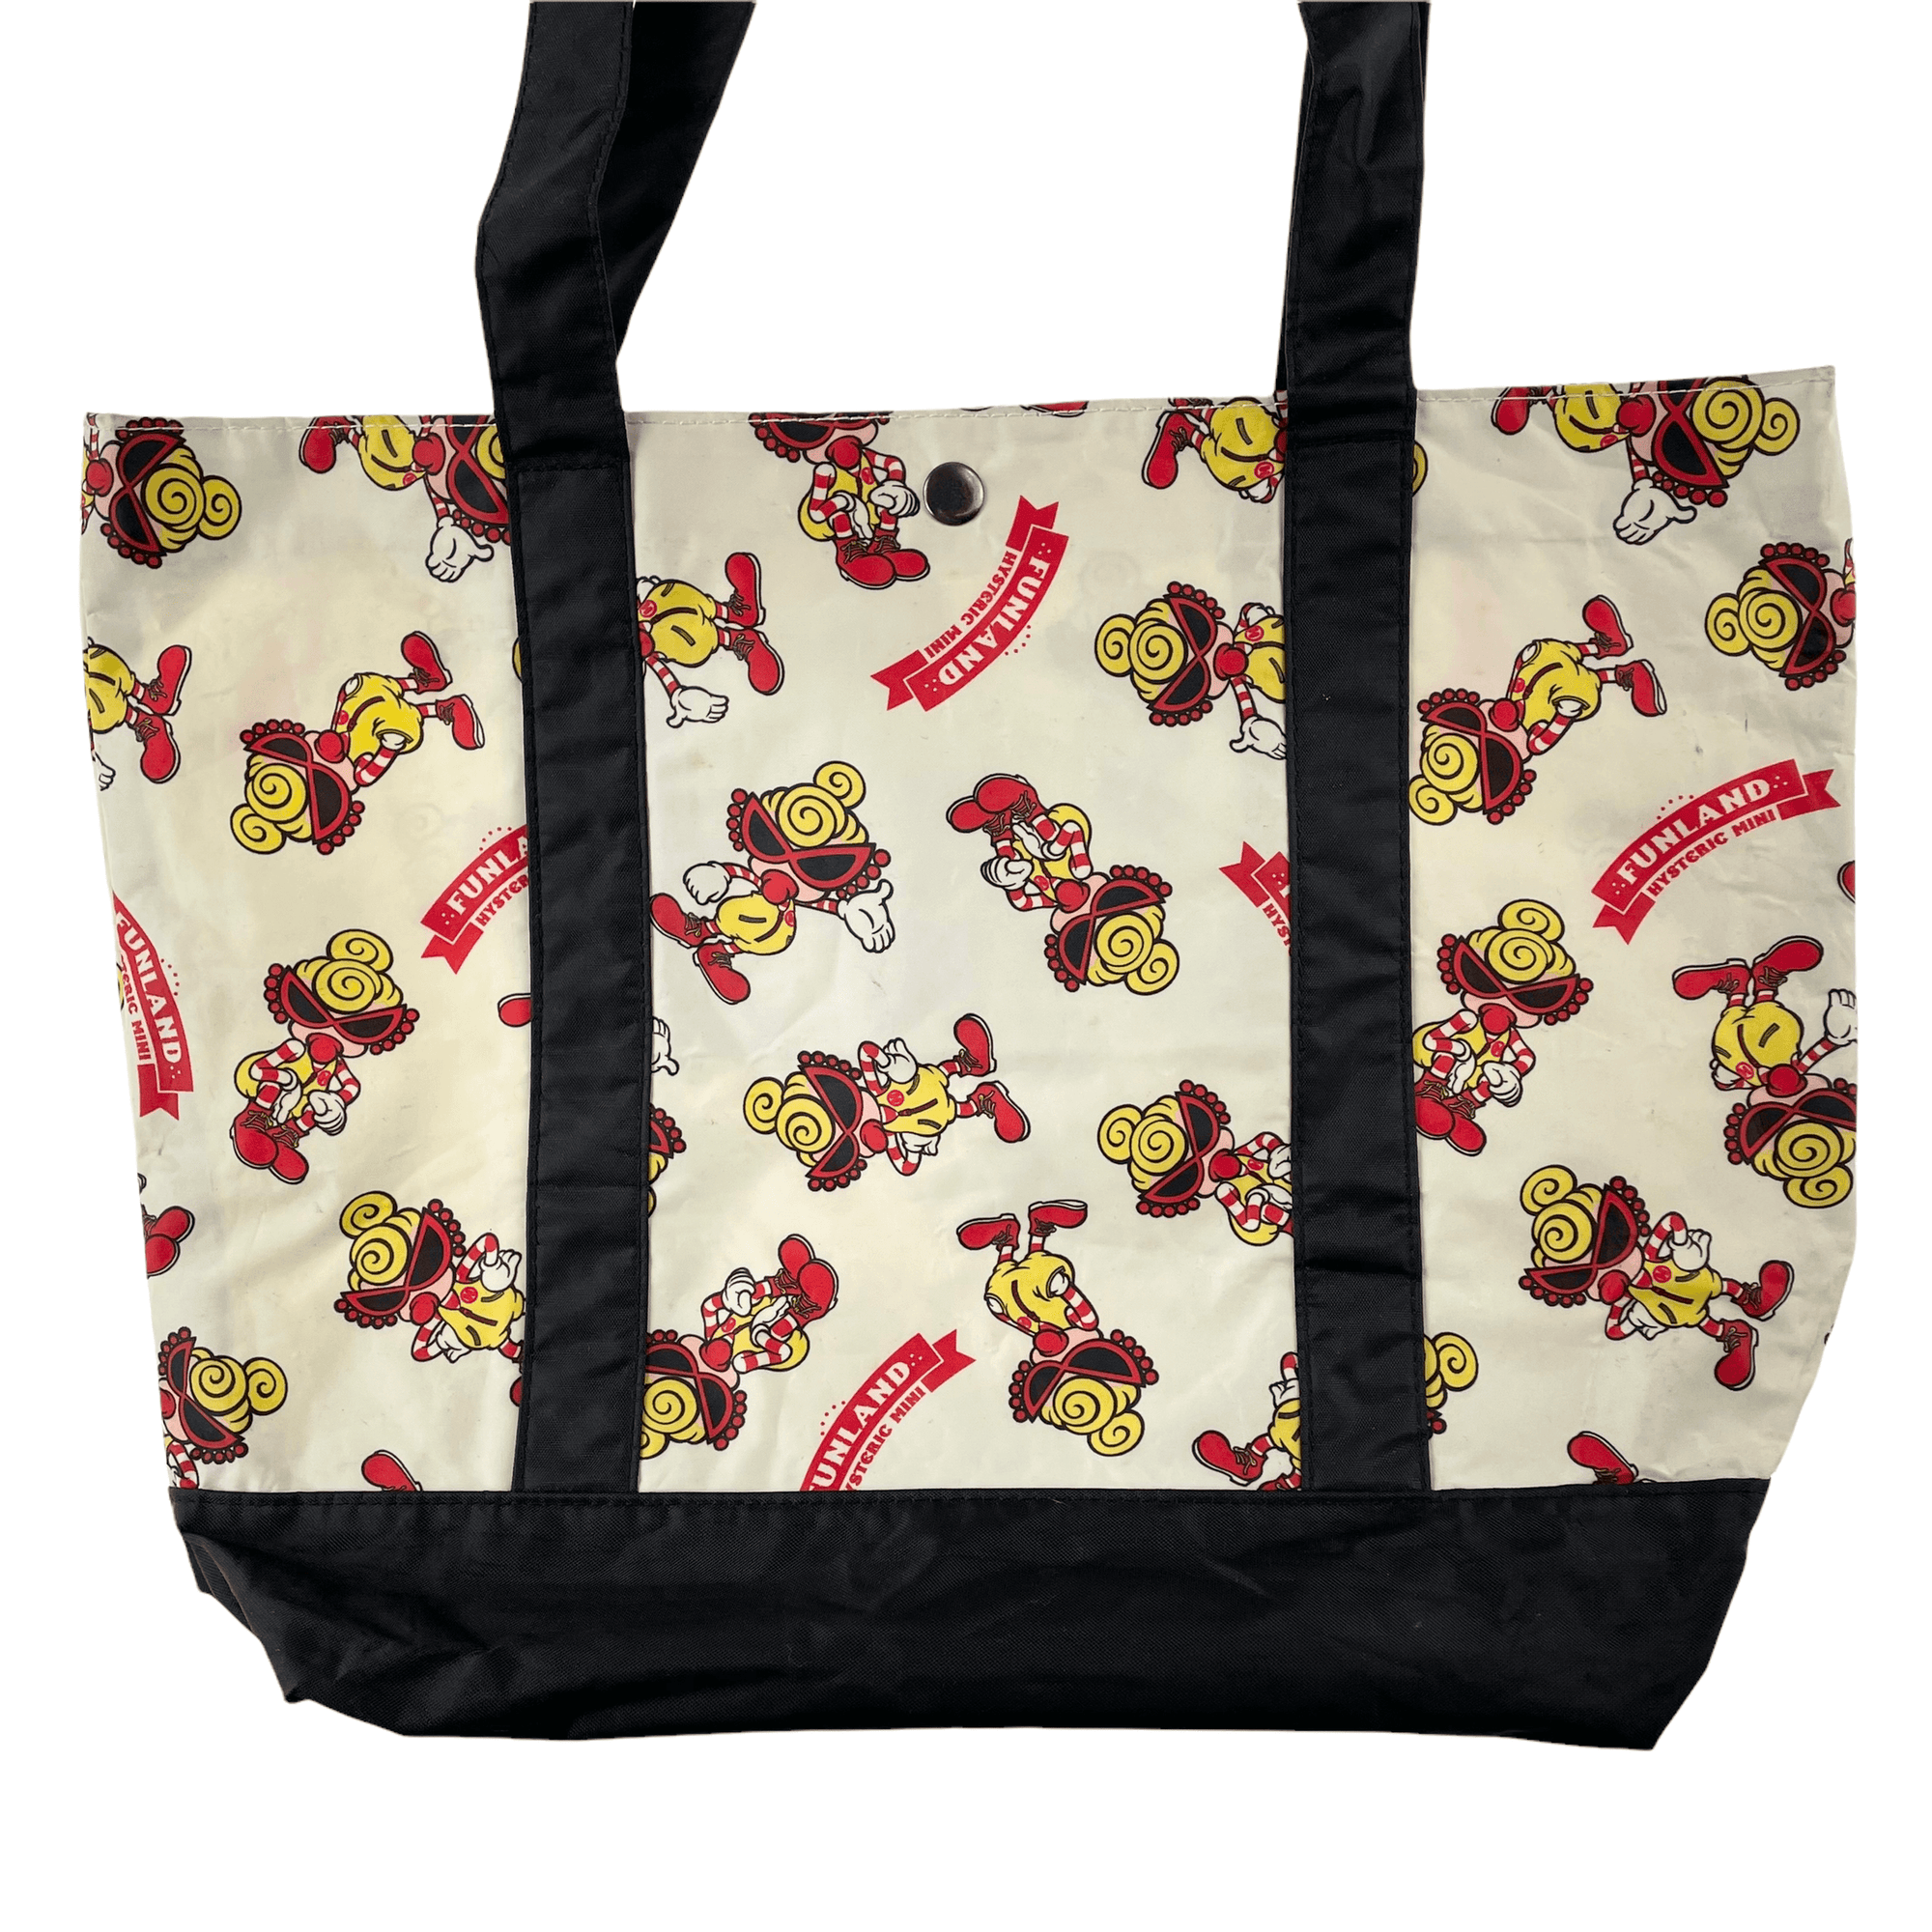 Vintage Hysteric Glamour tote bag - second wave vintage store